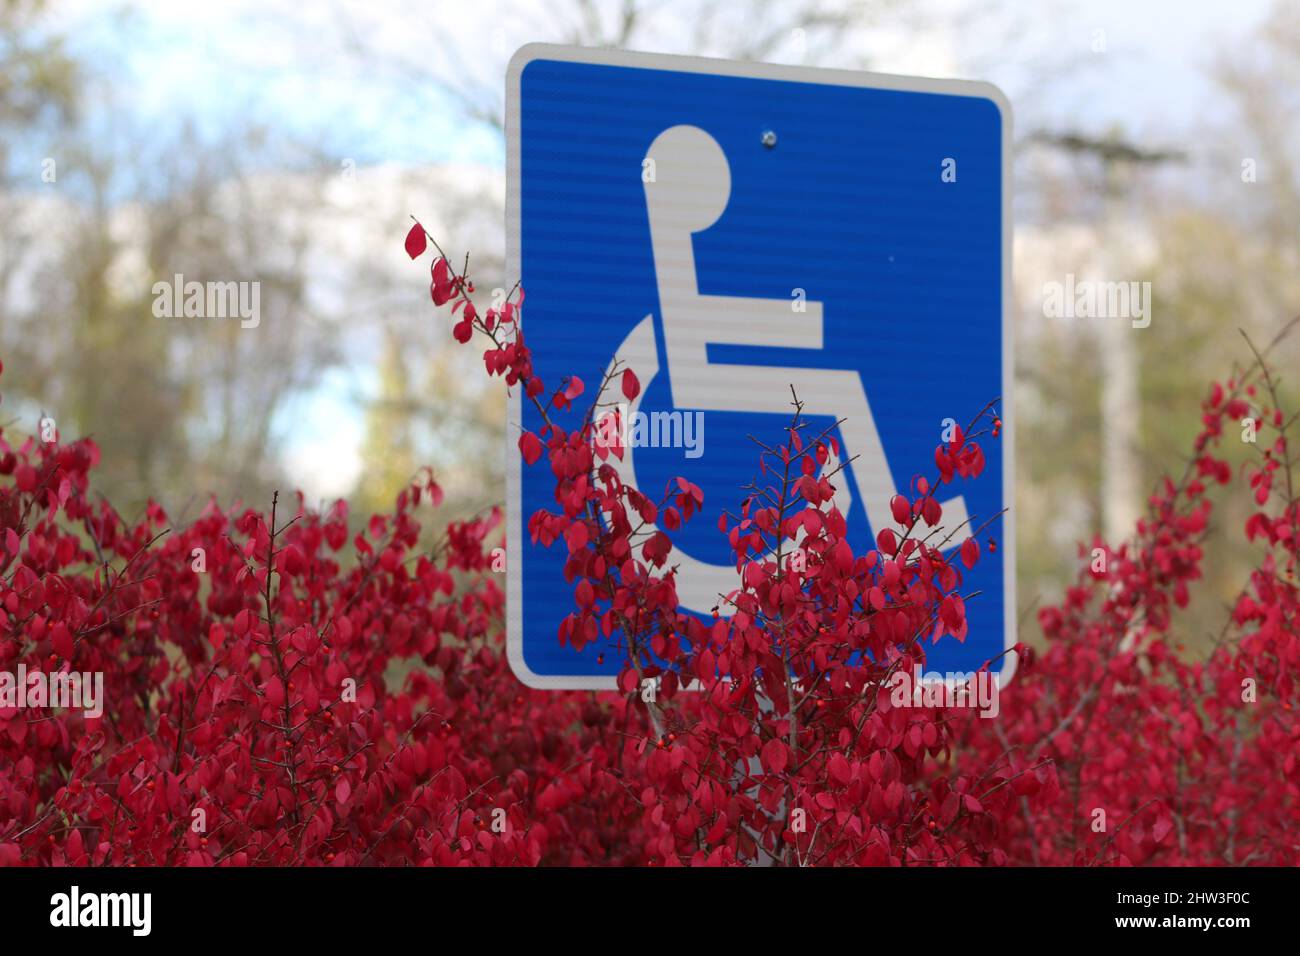 Handicap Parking sign in red bush Stock Photo